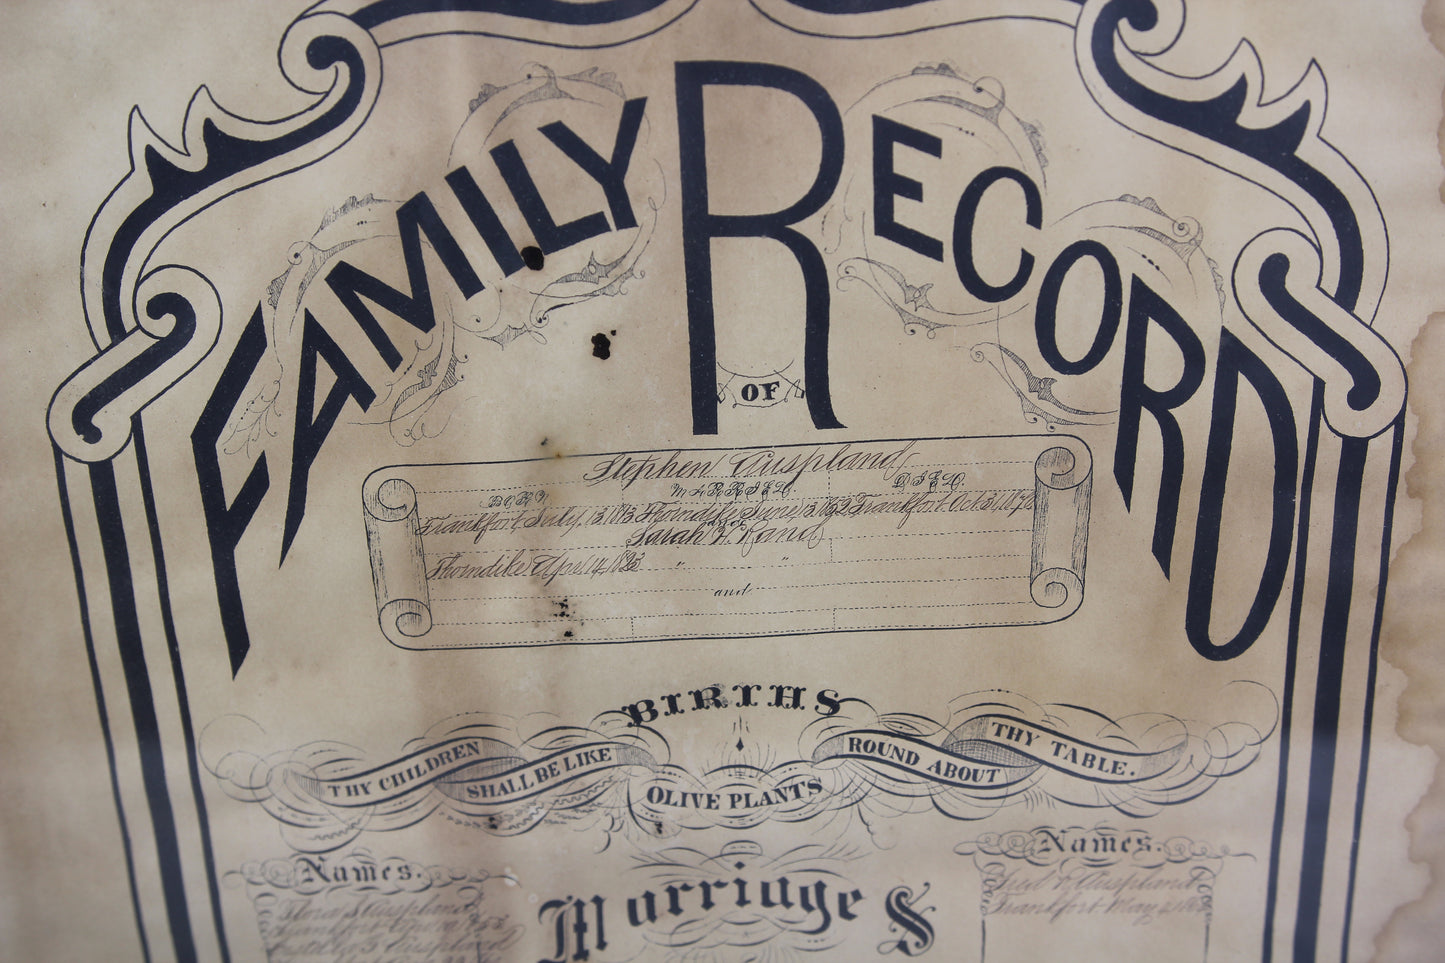 Family Record of Stephen Auspland of Frankfort, Maine - Lithograph Copyright 1878 by John R. Staples - 17.75" x 20.5"